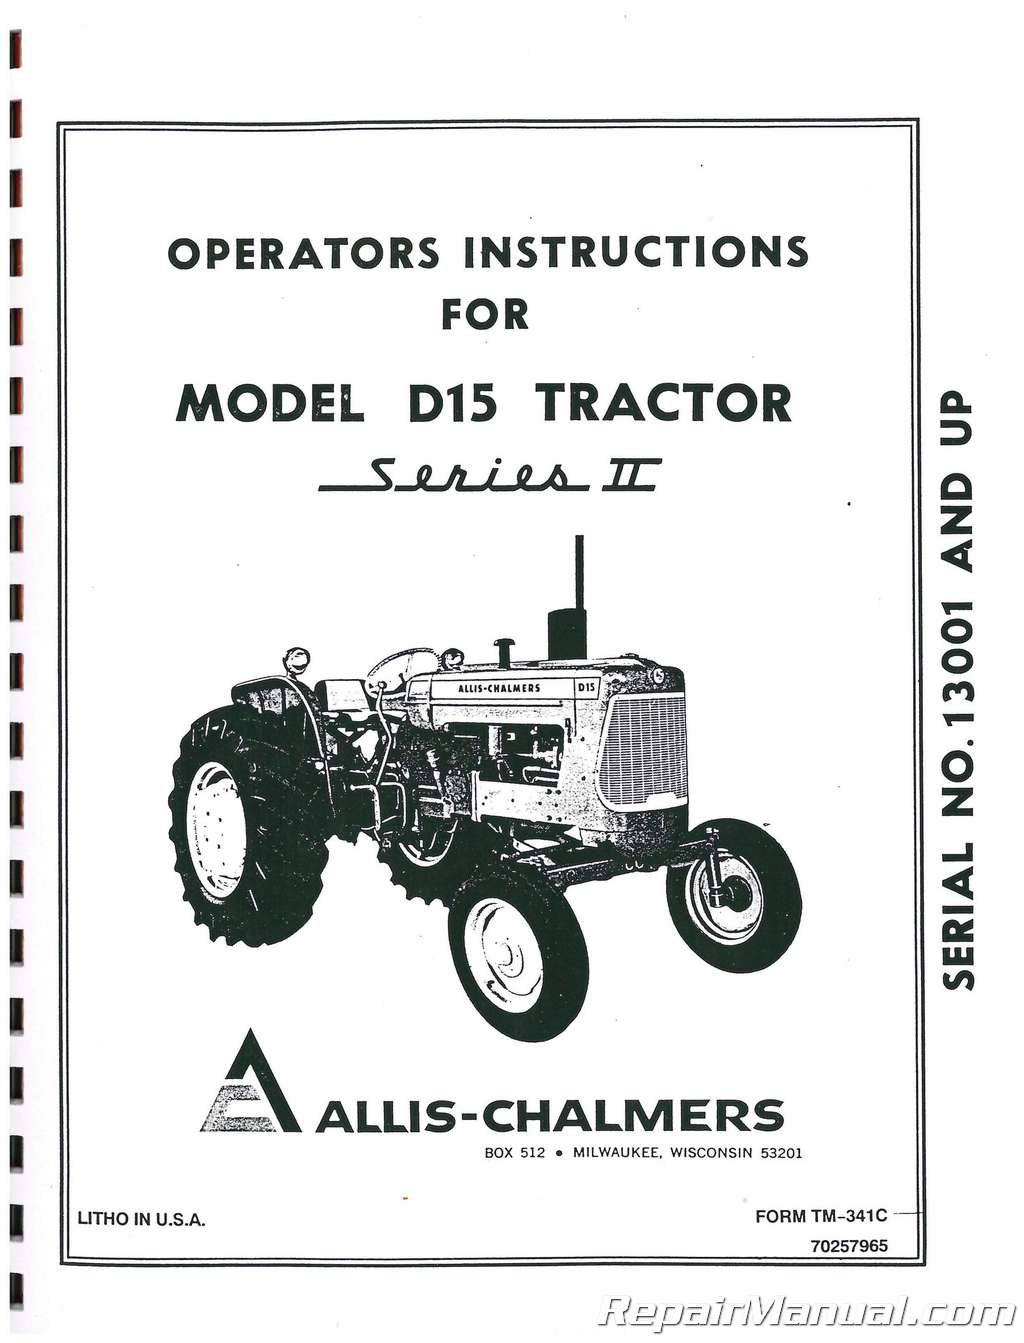 Allis Chalmers  D15 D-15 Diesel Tractor Operators and Instructions Manual TM-274 